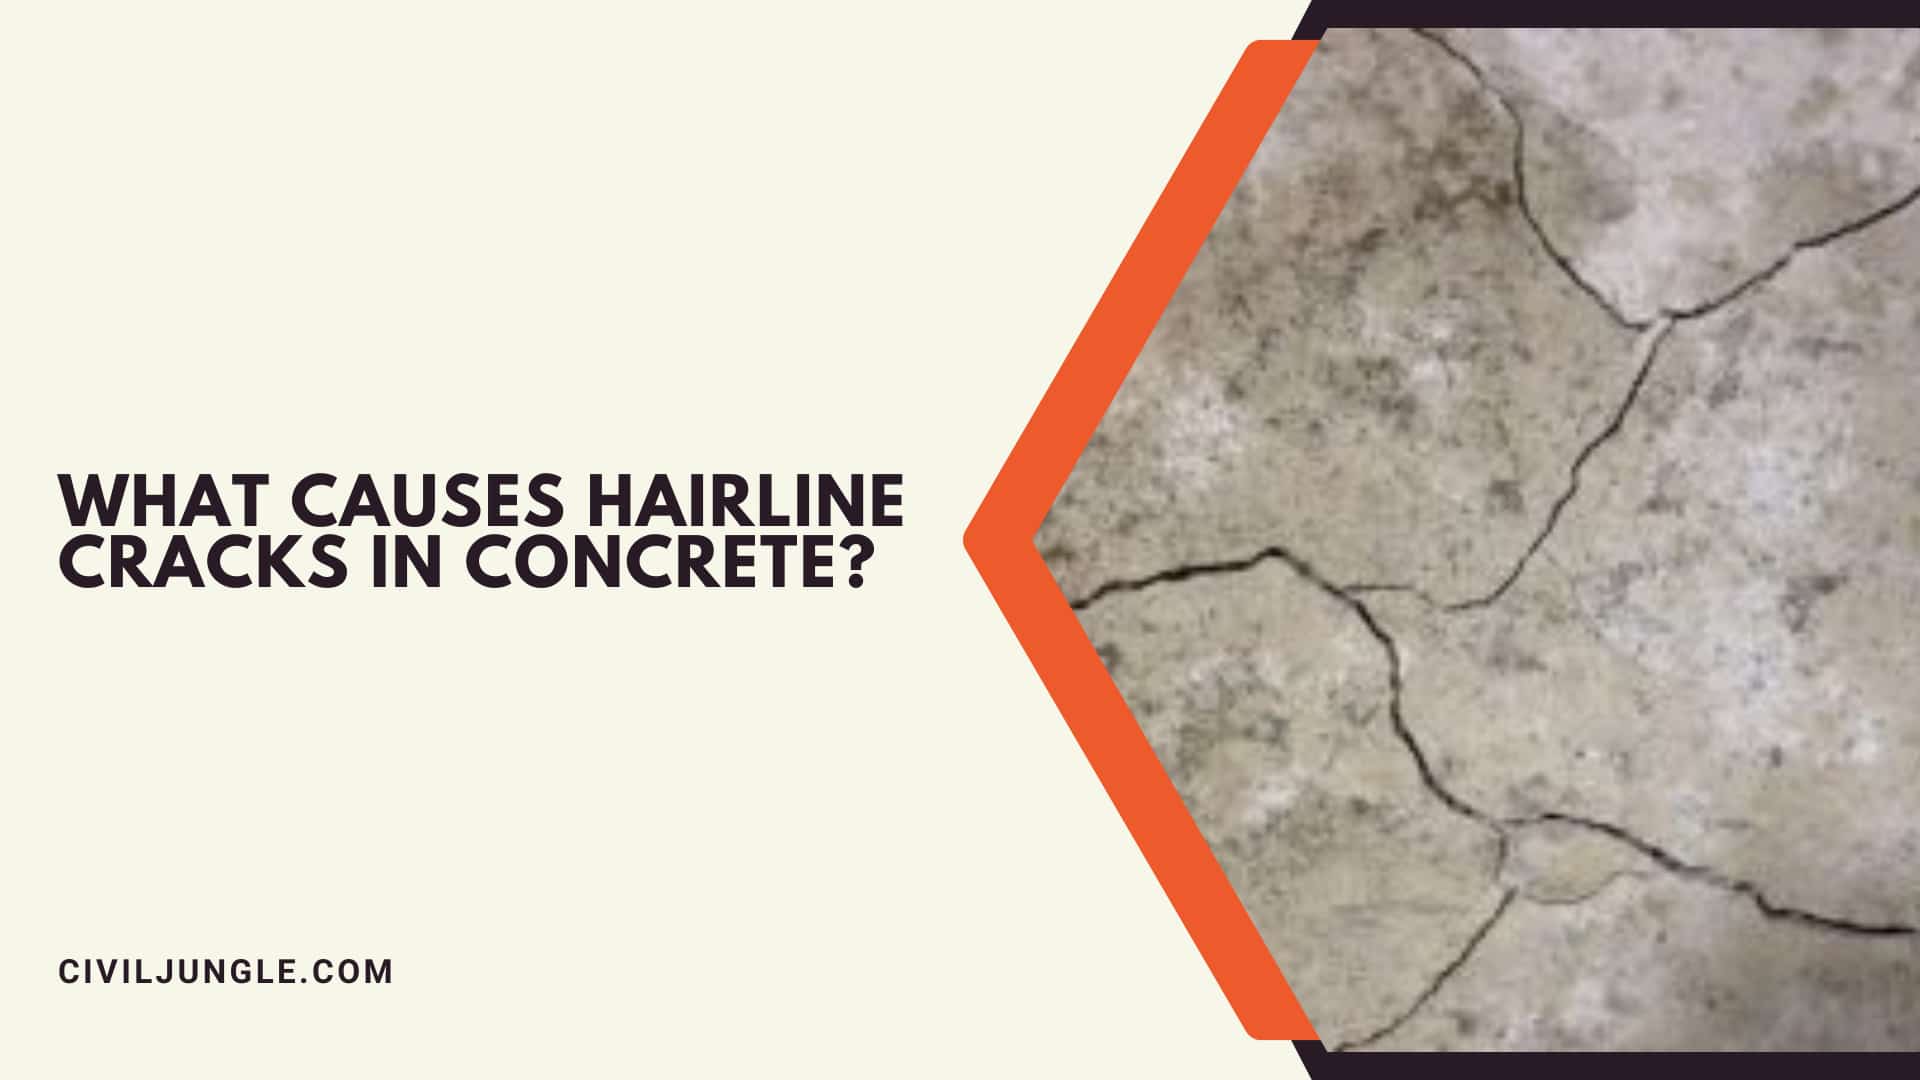 What Causes Hairline Cracks In Concrete?